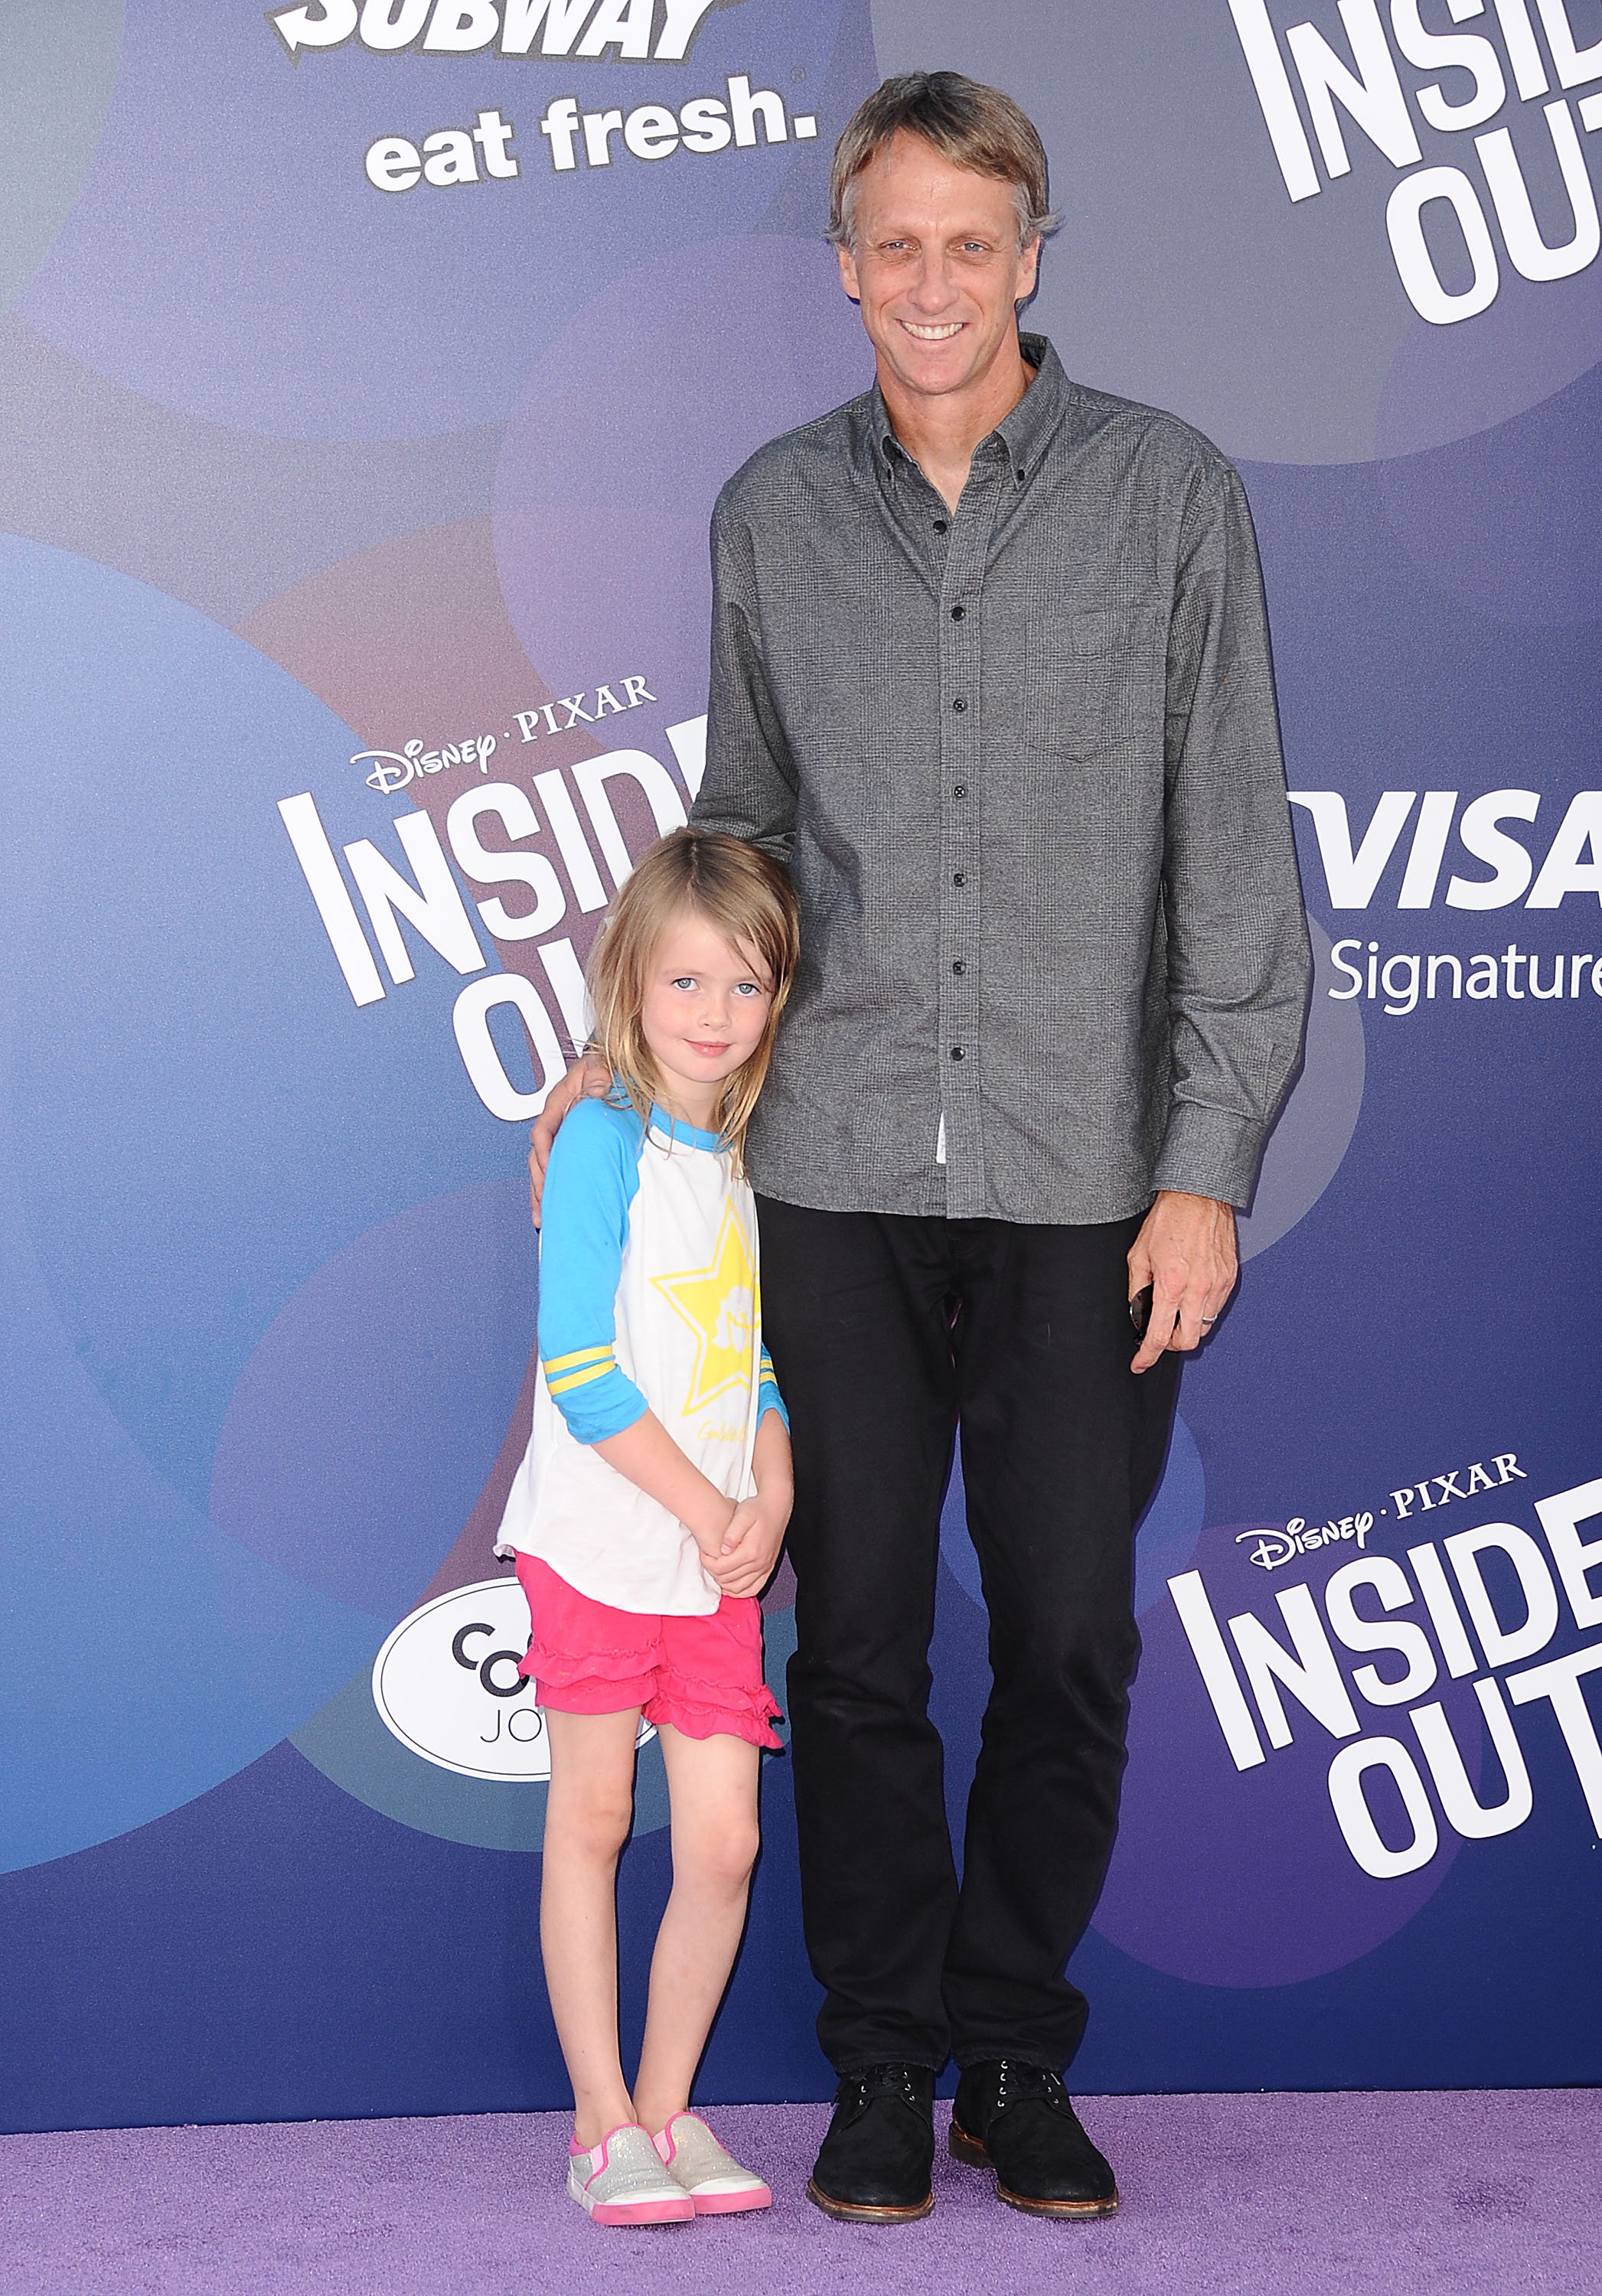 Tony Hawk and his daughter, Kadence Clover, pose on the red carpet at the premiere of 